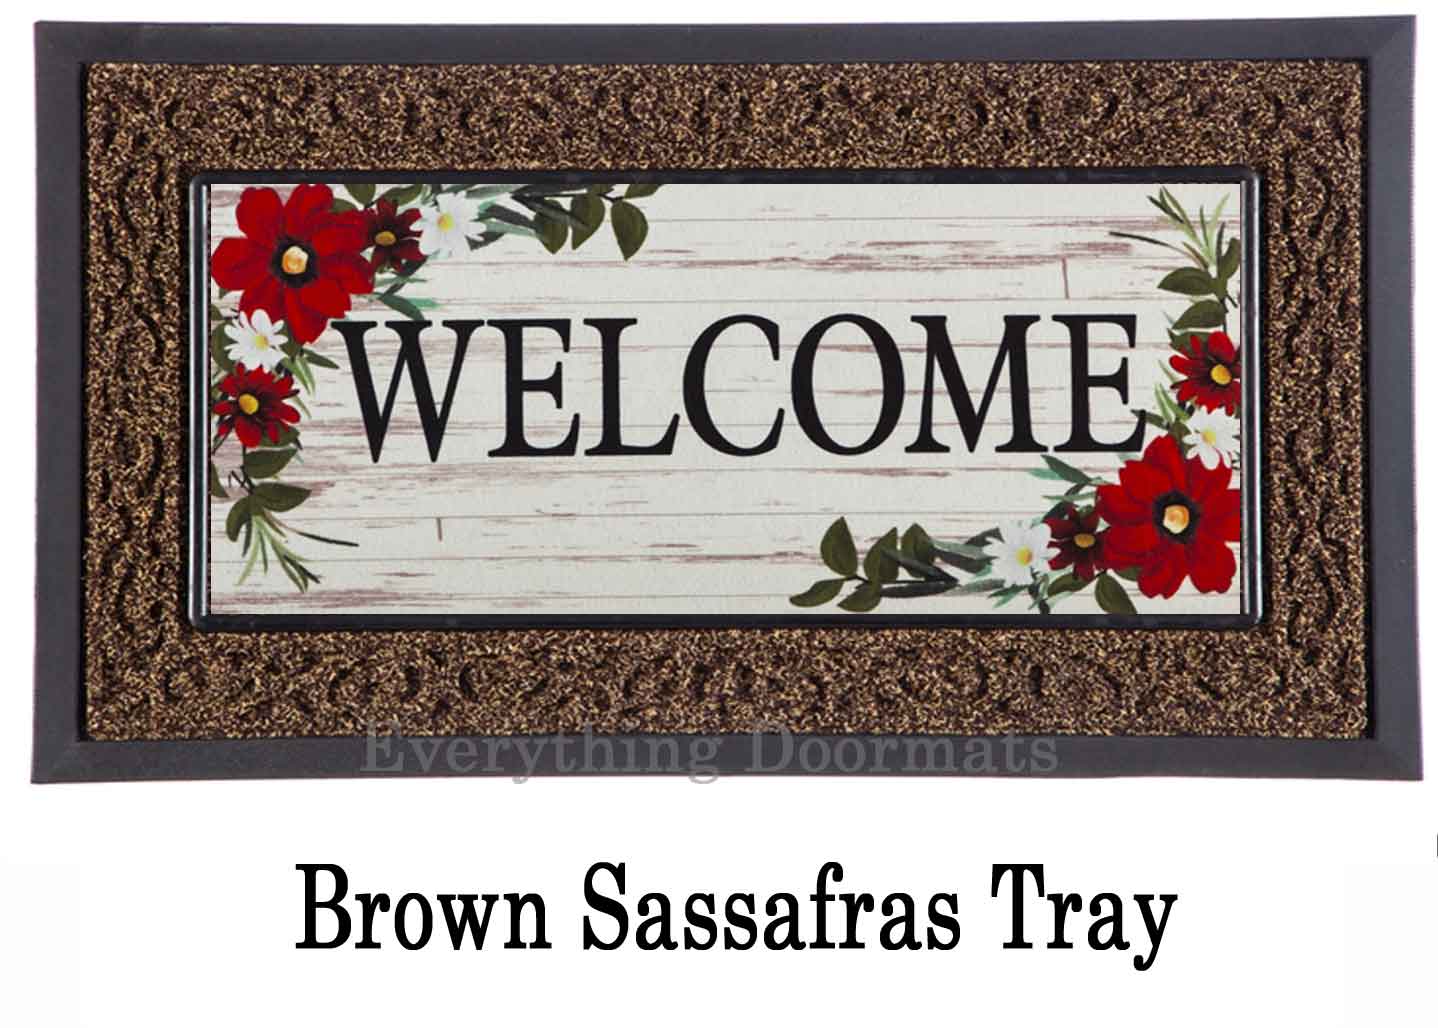 https://www.everythingdoormats.com/images/products/red-floral-welcome-sassafras-switch-insert-doormat-in-brown-insert-tray.jpg